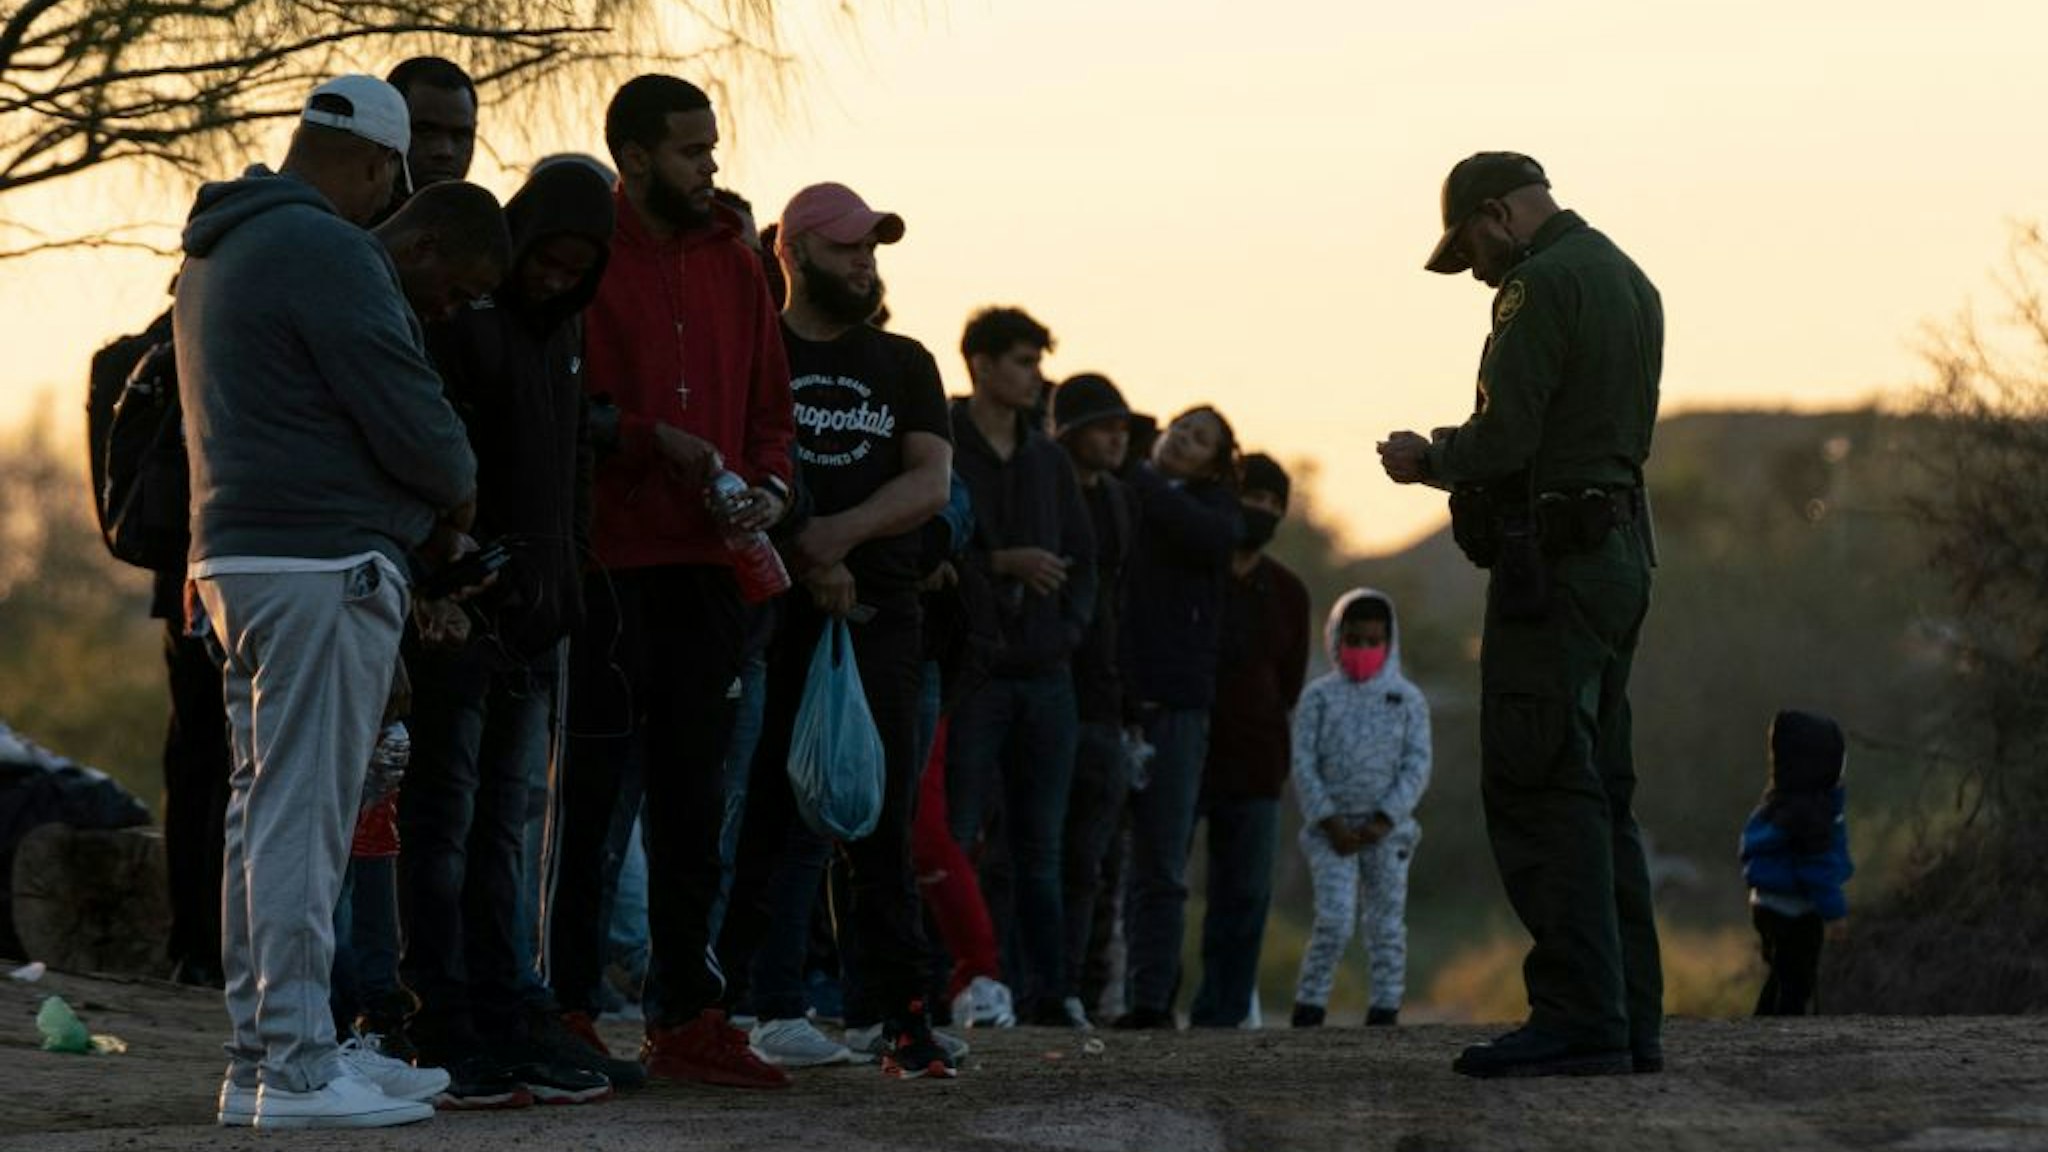 Migrants wait to be processed by Border Patrol agents in Eagle Pass, Texas on December 19, 2022. - The US Supreme Court halted December 19, 2022 the imminent removal of Title 42, a key policy used since the administration of president Donald Trump to block migrants at the southwest border, amid worries over a surge in undocumented immigrants. (Photo by VERONICA G. CARDENAS / AFP) (Photo by VERONICA G. CARDENAS/AFP via Getty Images)